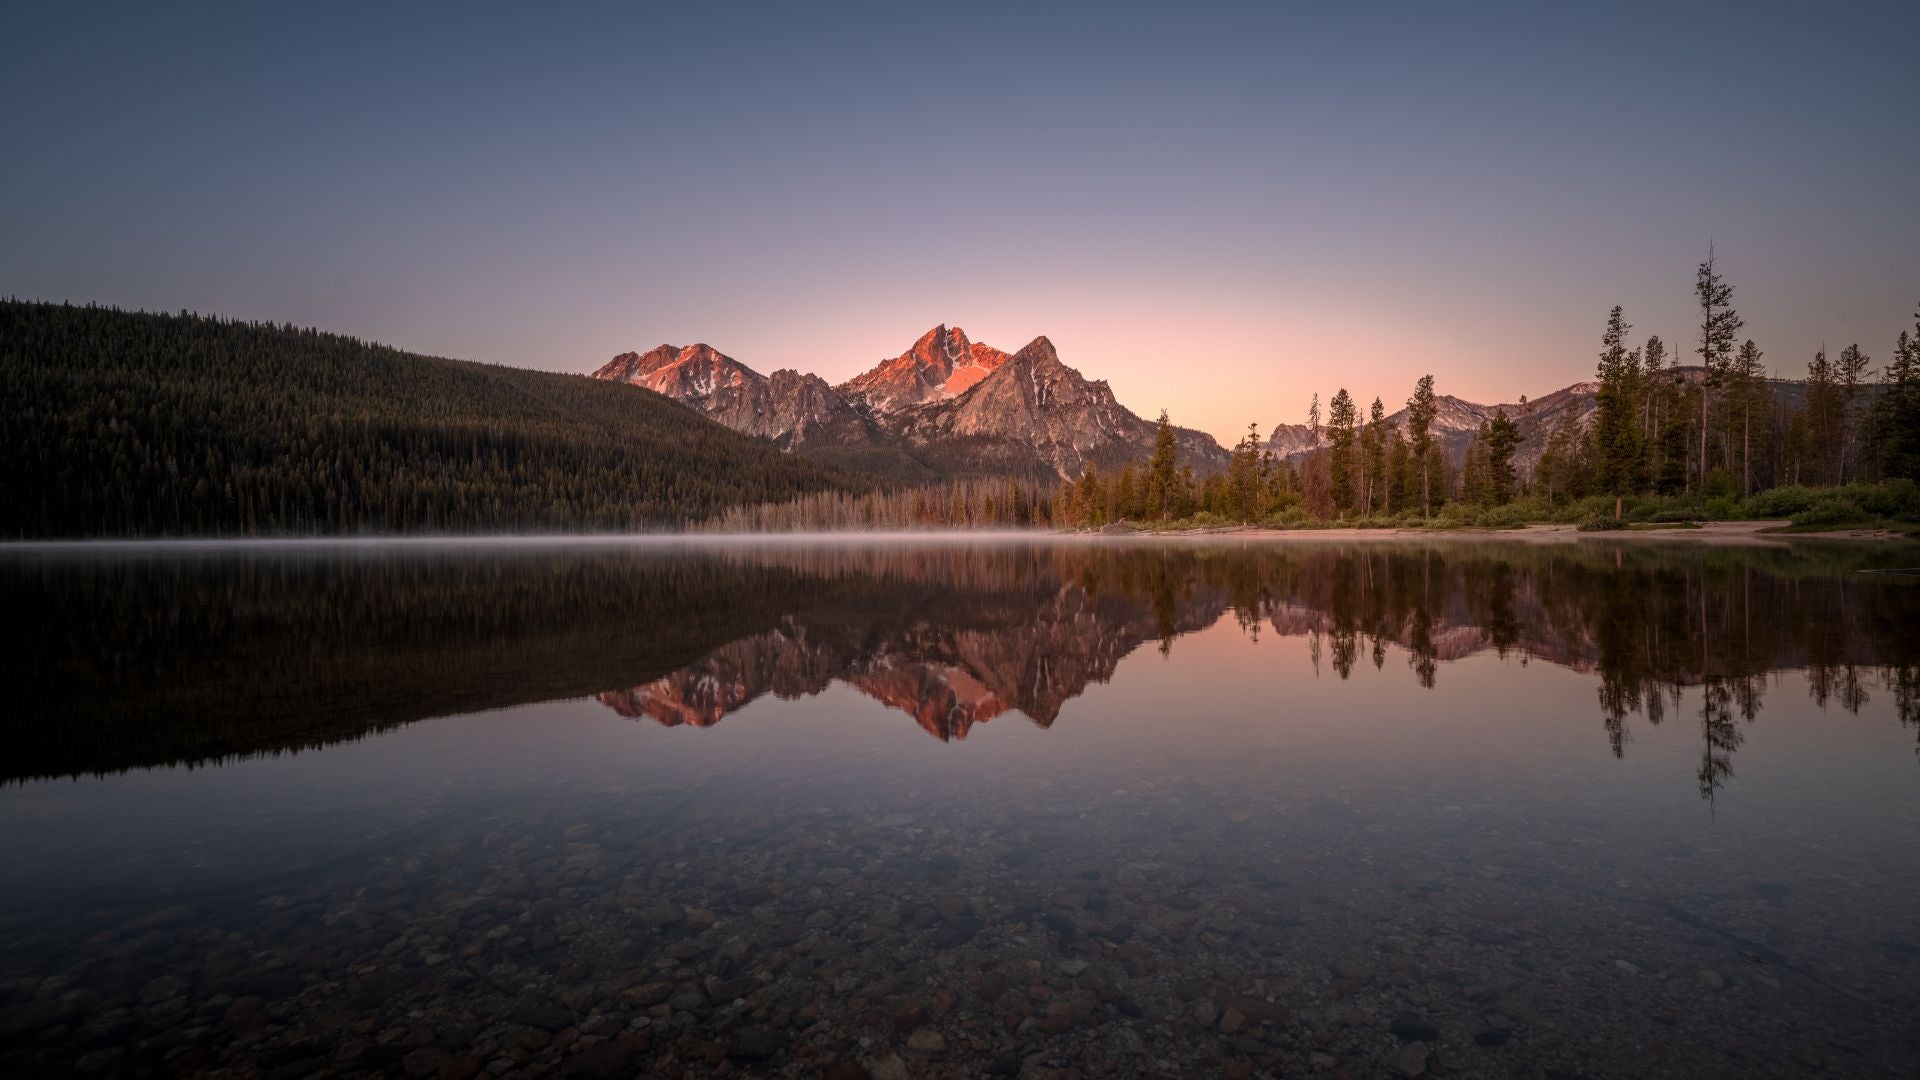 View of Sawtooth Range with reflection on the water in Idaho - History By Mail